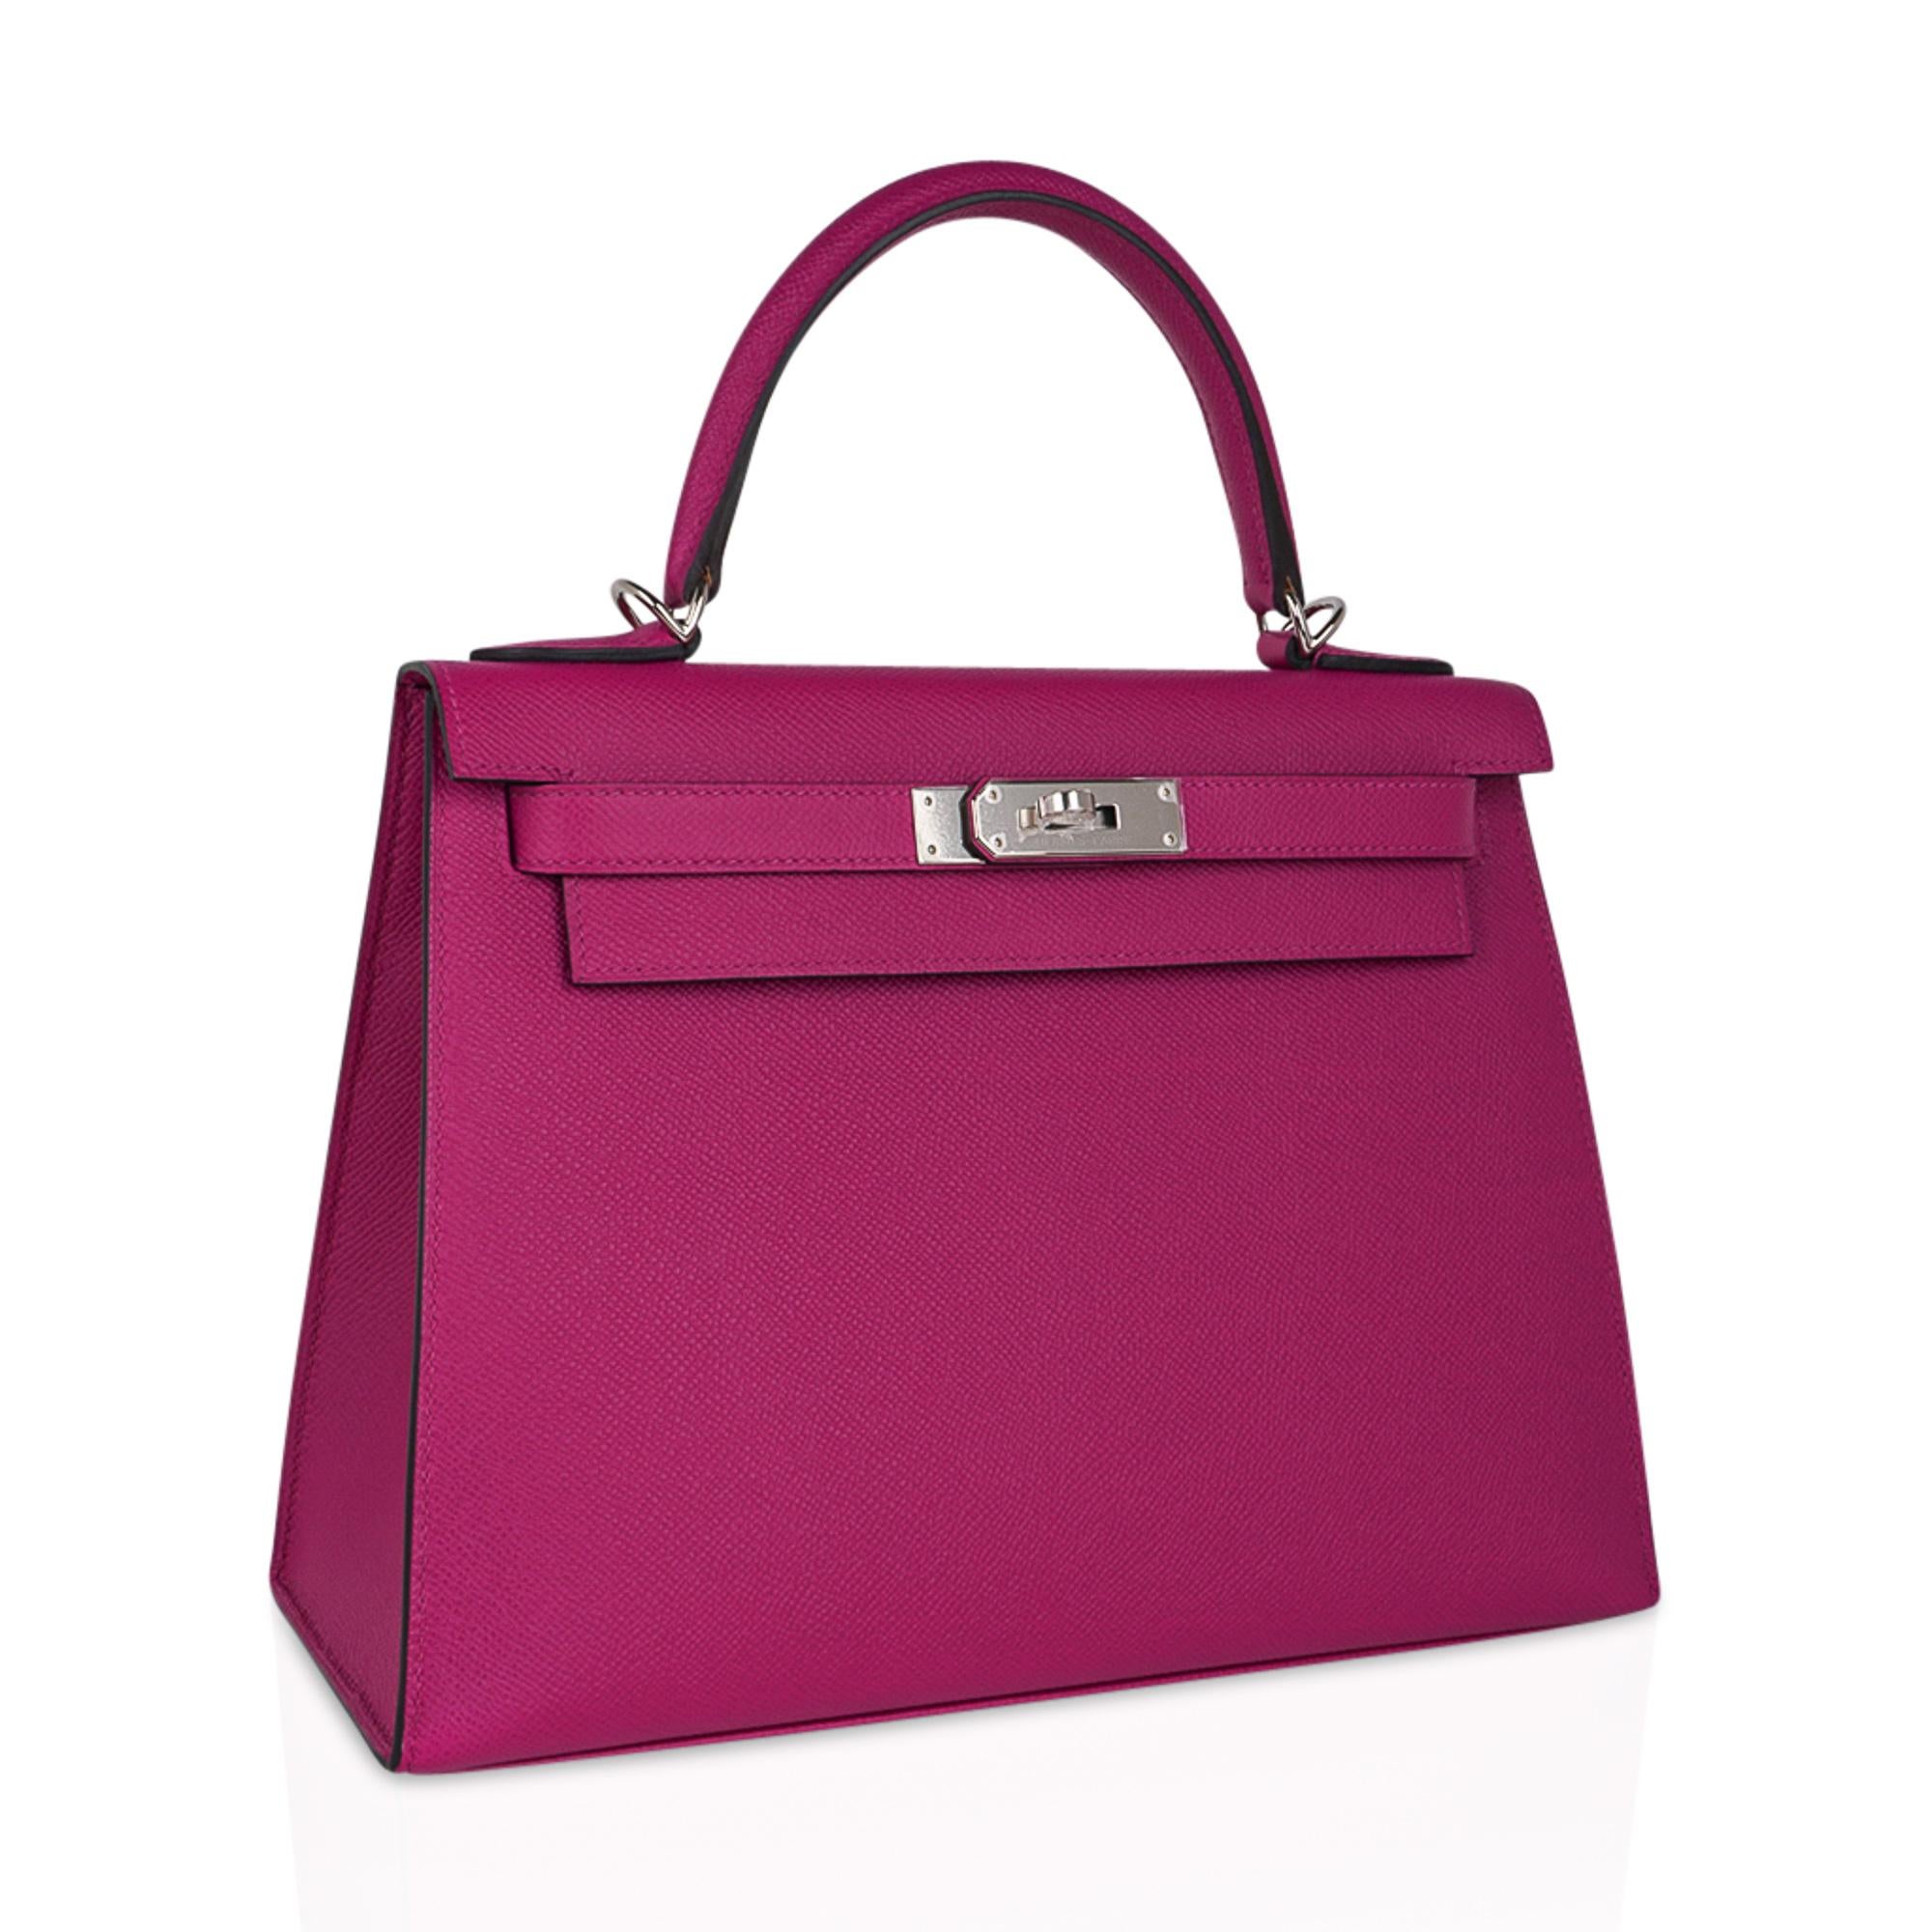 Mightychic offers an Hermes Kelly Sellier 28 featured in rich Rose Pourpre.
Beautiful and exotic, this epsom leather Hermes Kelly Sellier limited edition bag is perfect for year round wear.
Lush with Gold hardware.
Divine size for day to